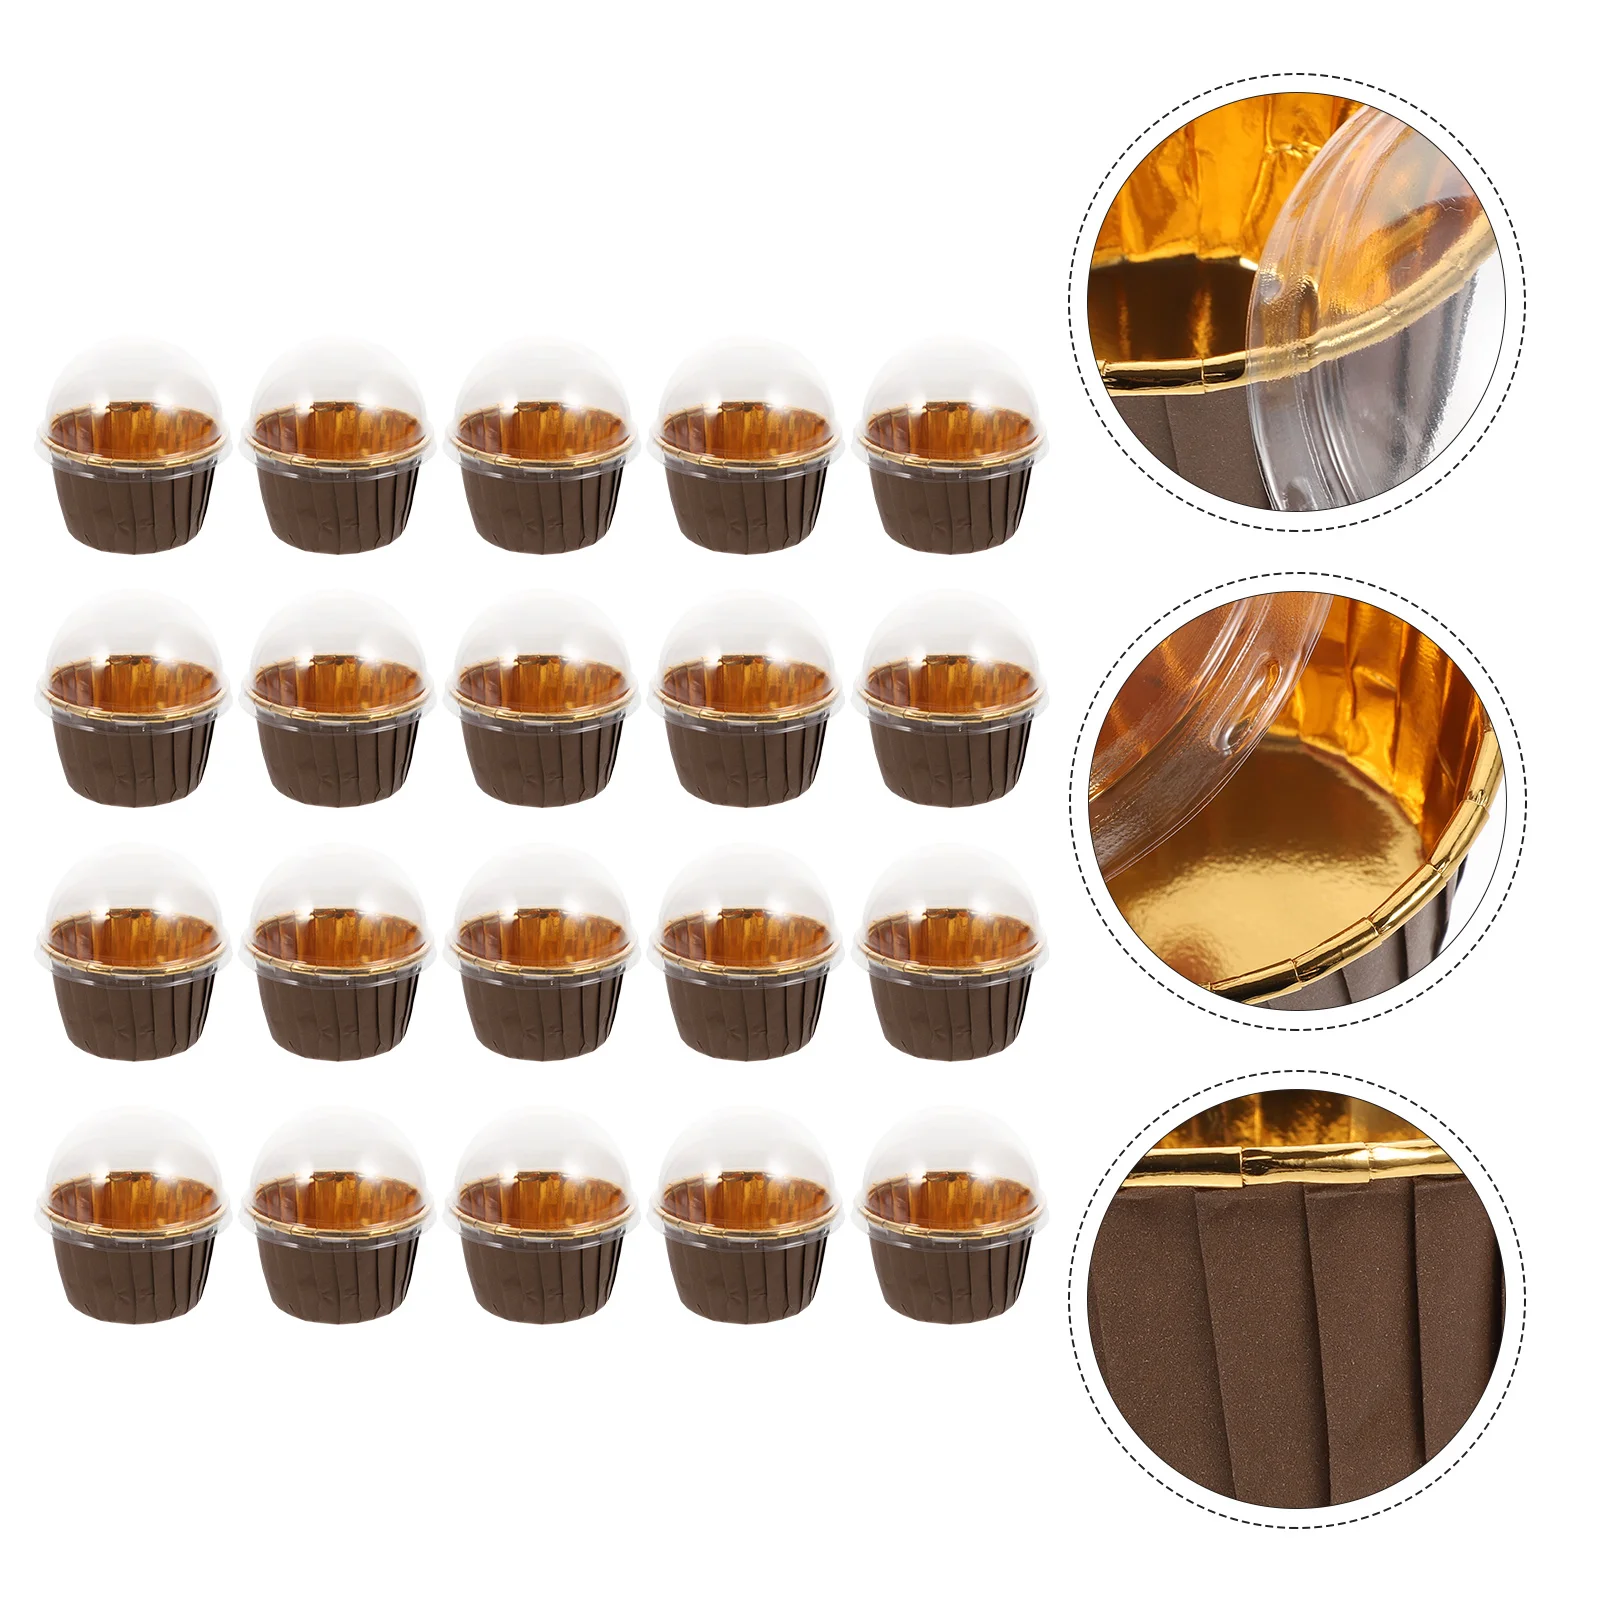 

100 Pcs Mini Paper Cups Roll Curling Kitchen Supplies Dessert 6.8X6.8CM Baking Containers Cake Coffee Molds